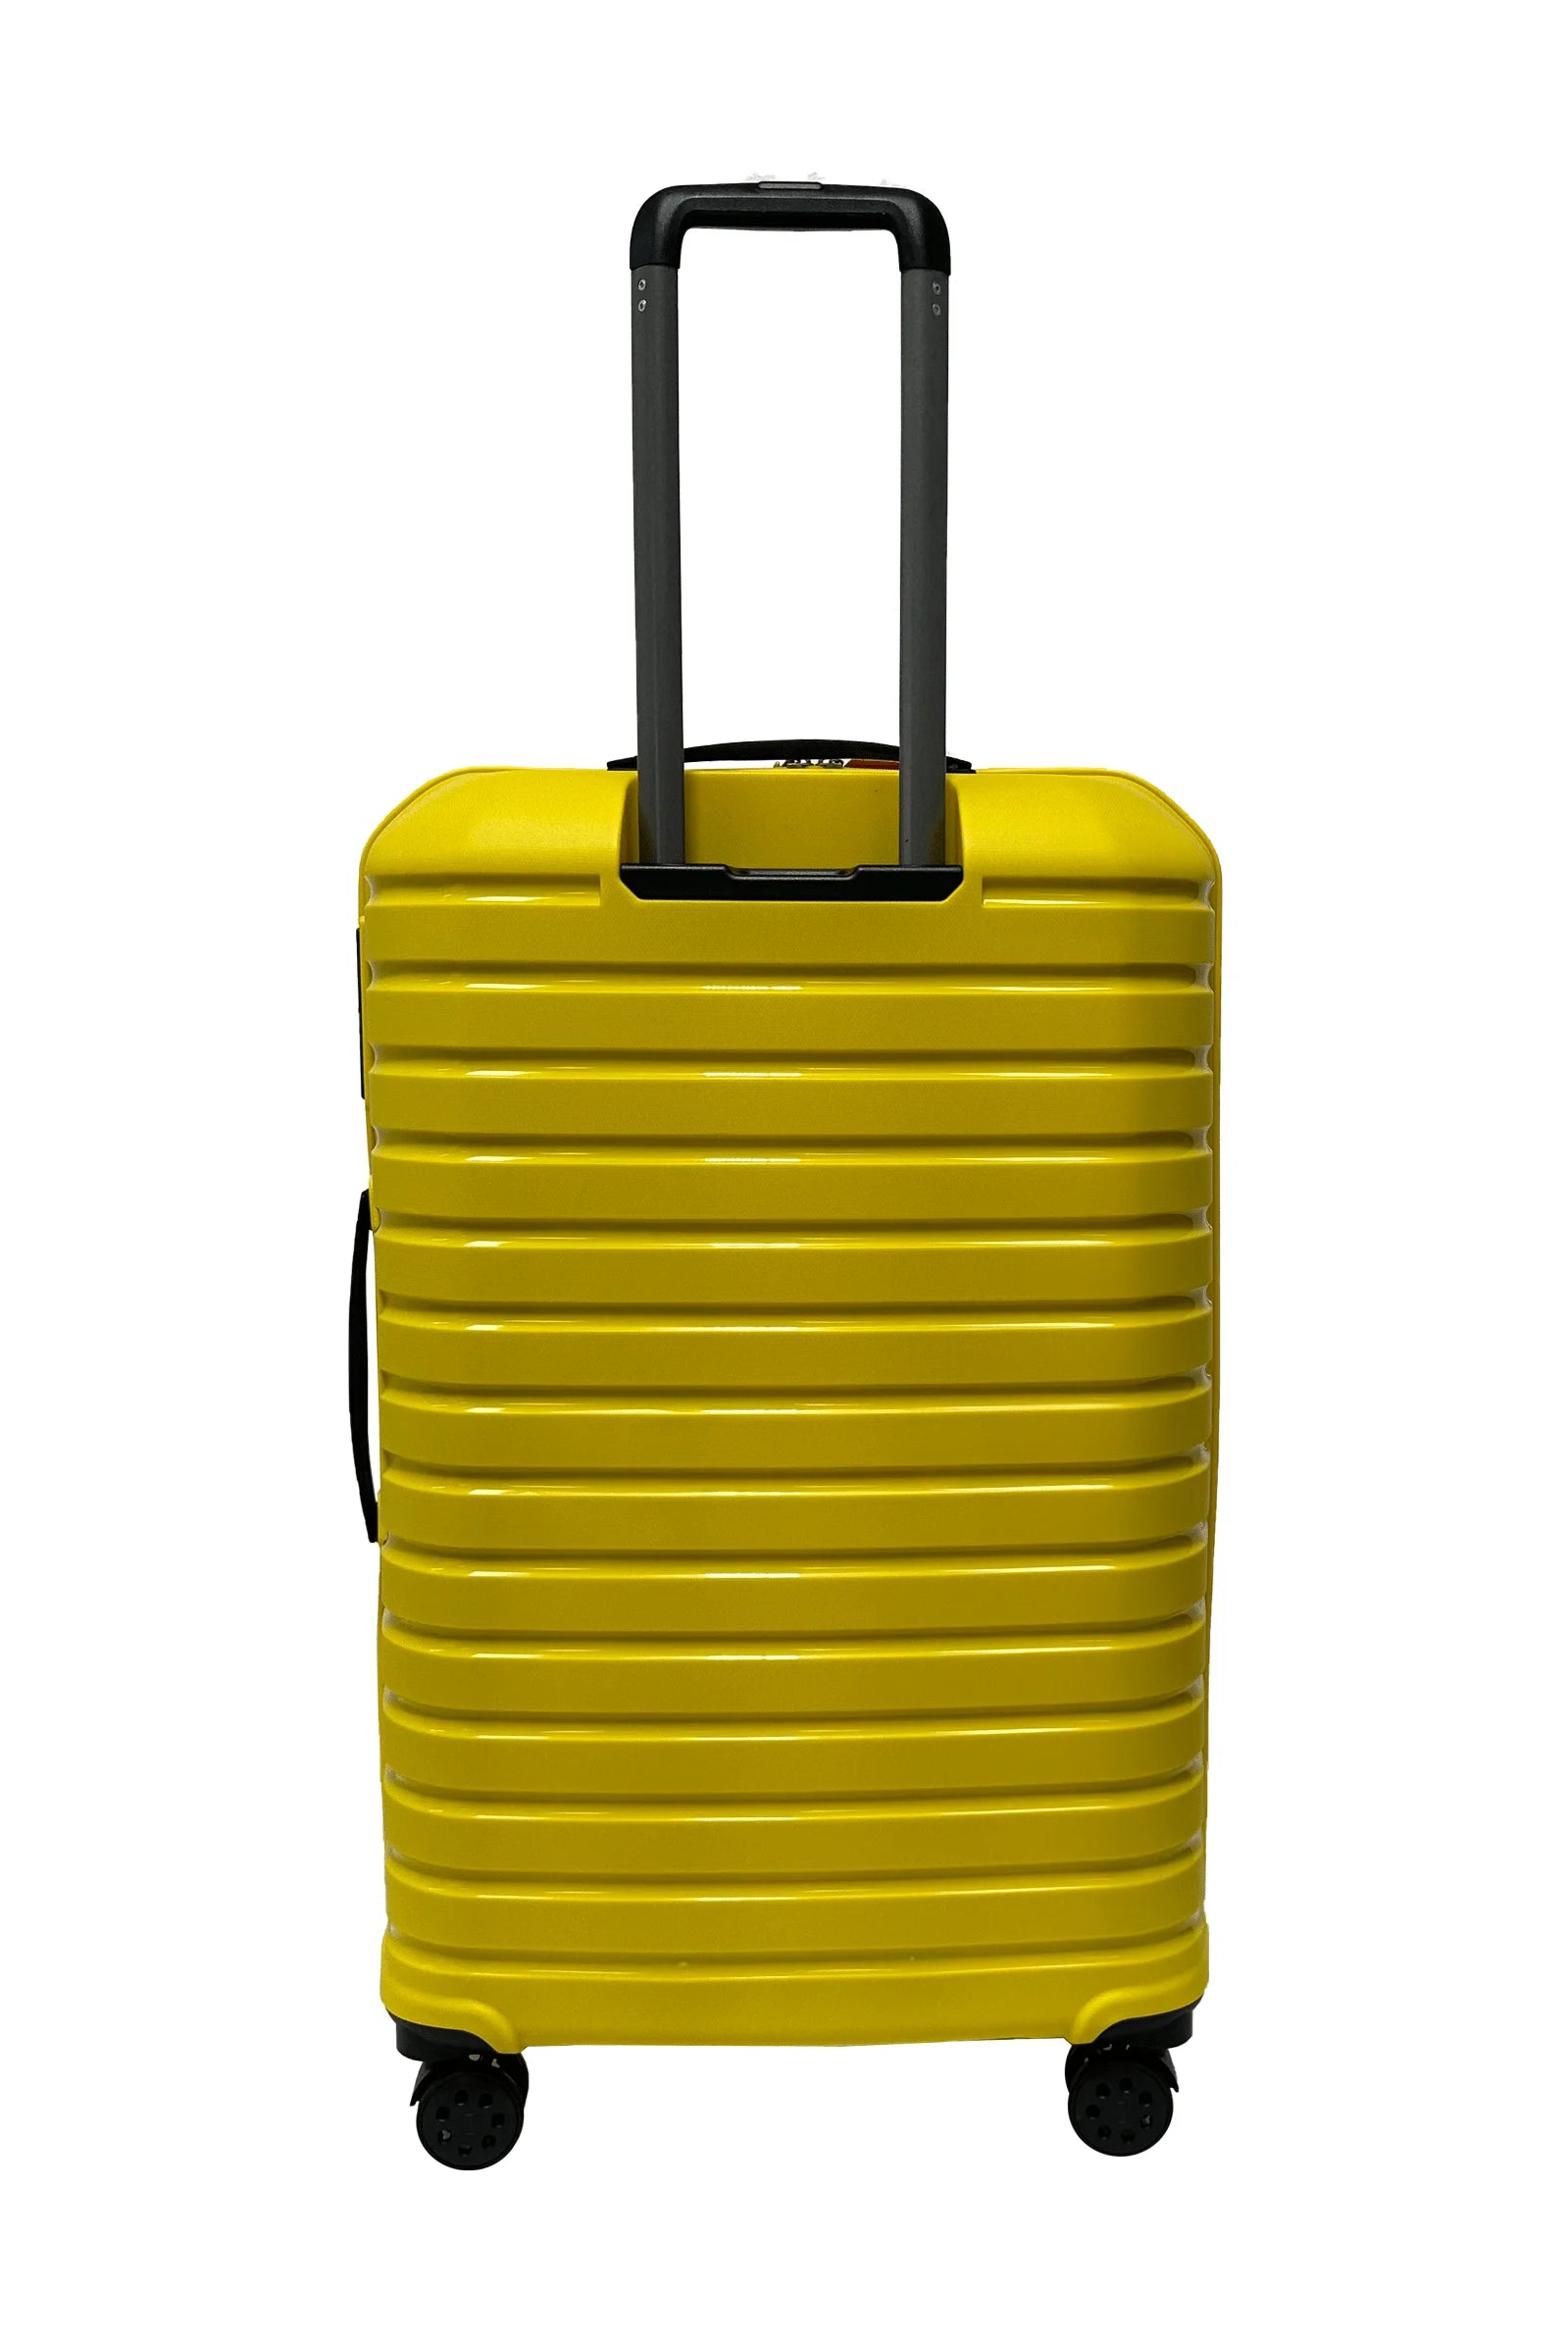 Large yellow suitcase with wheels